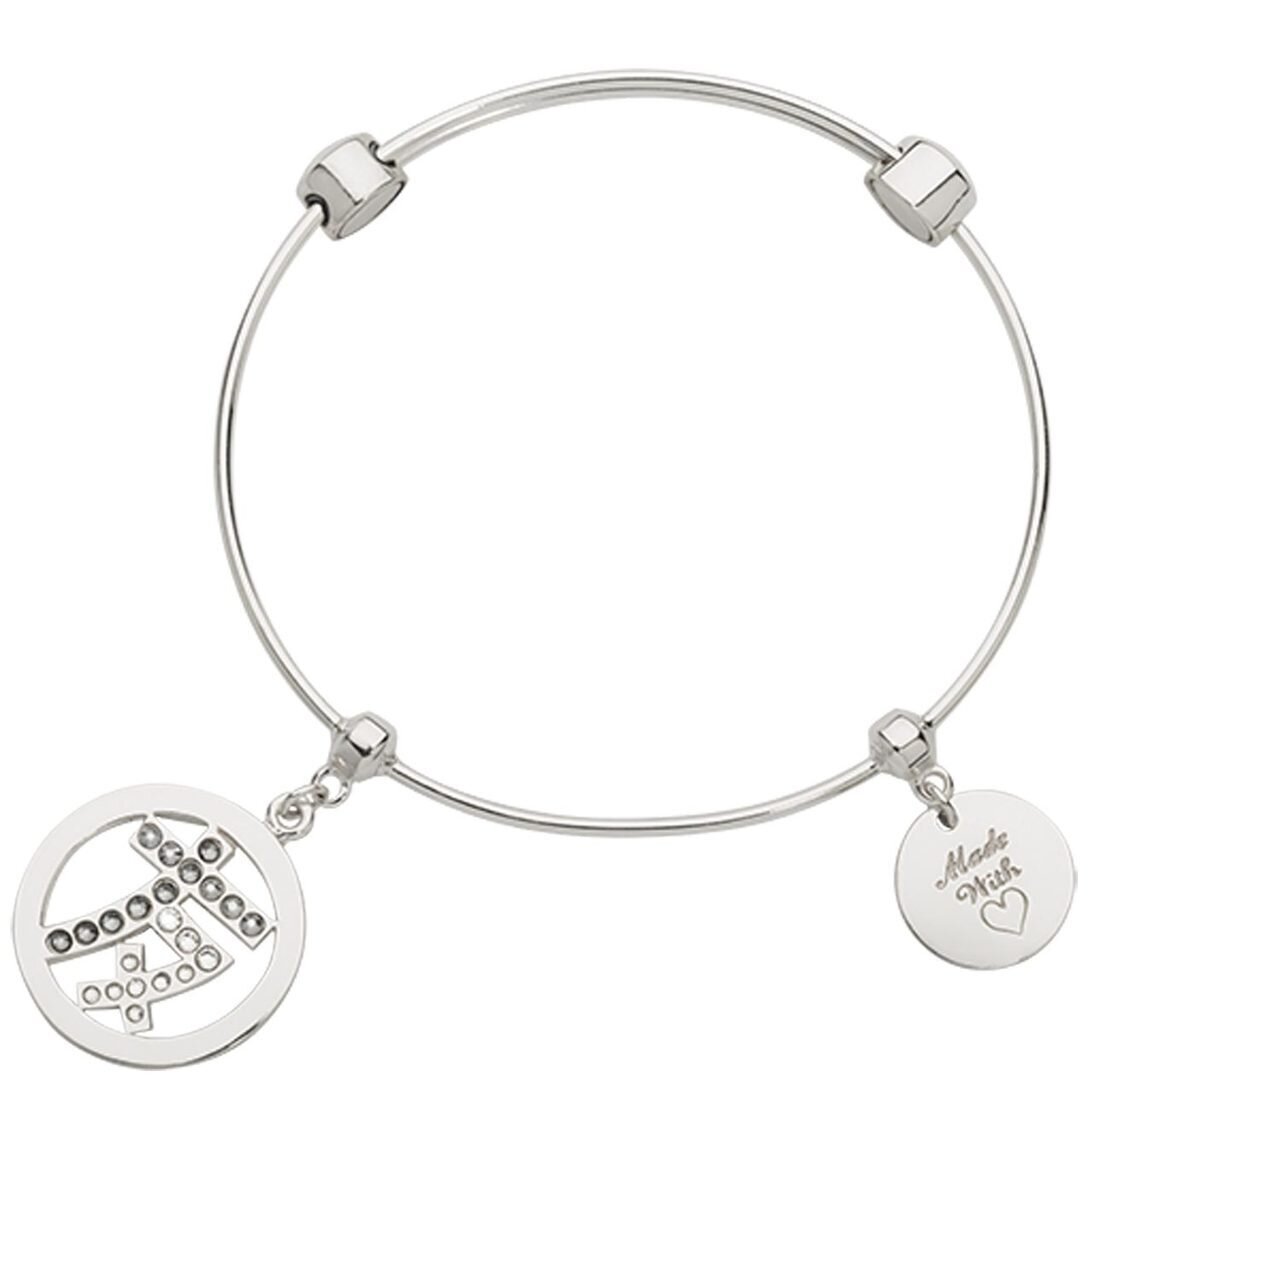 Nikki Lissoni Charm Bangle with Two Fixed Charms Infused with Emotion By Chinese Sign For Friendship Silver-plated 17cm B1149S17